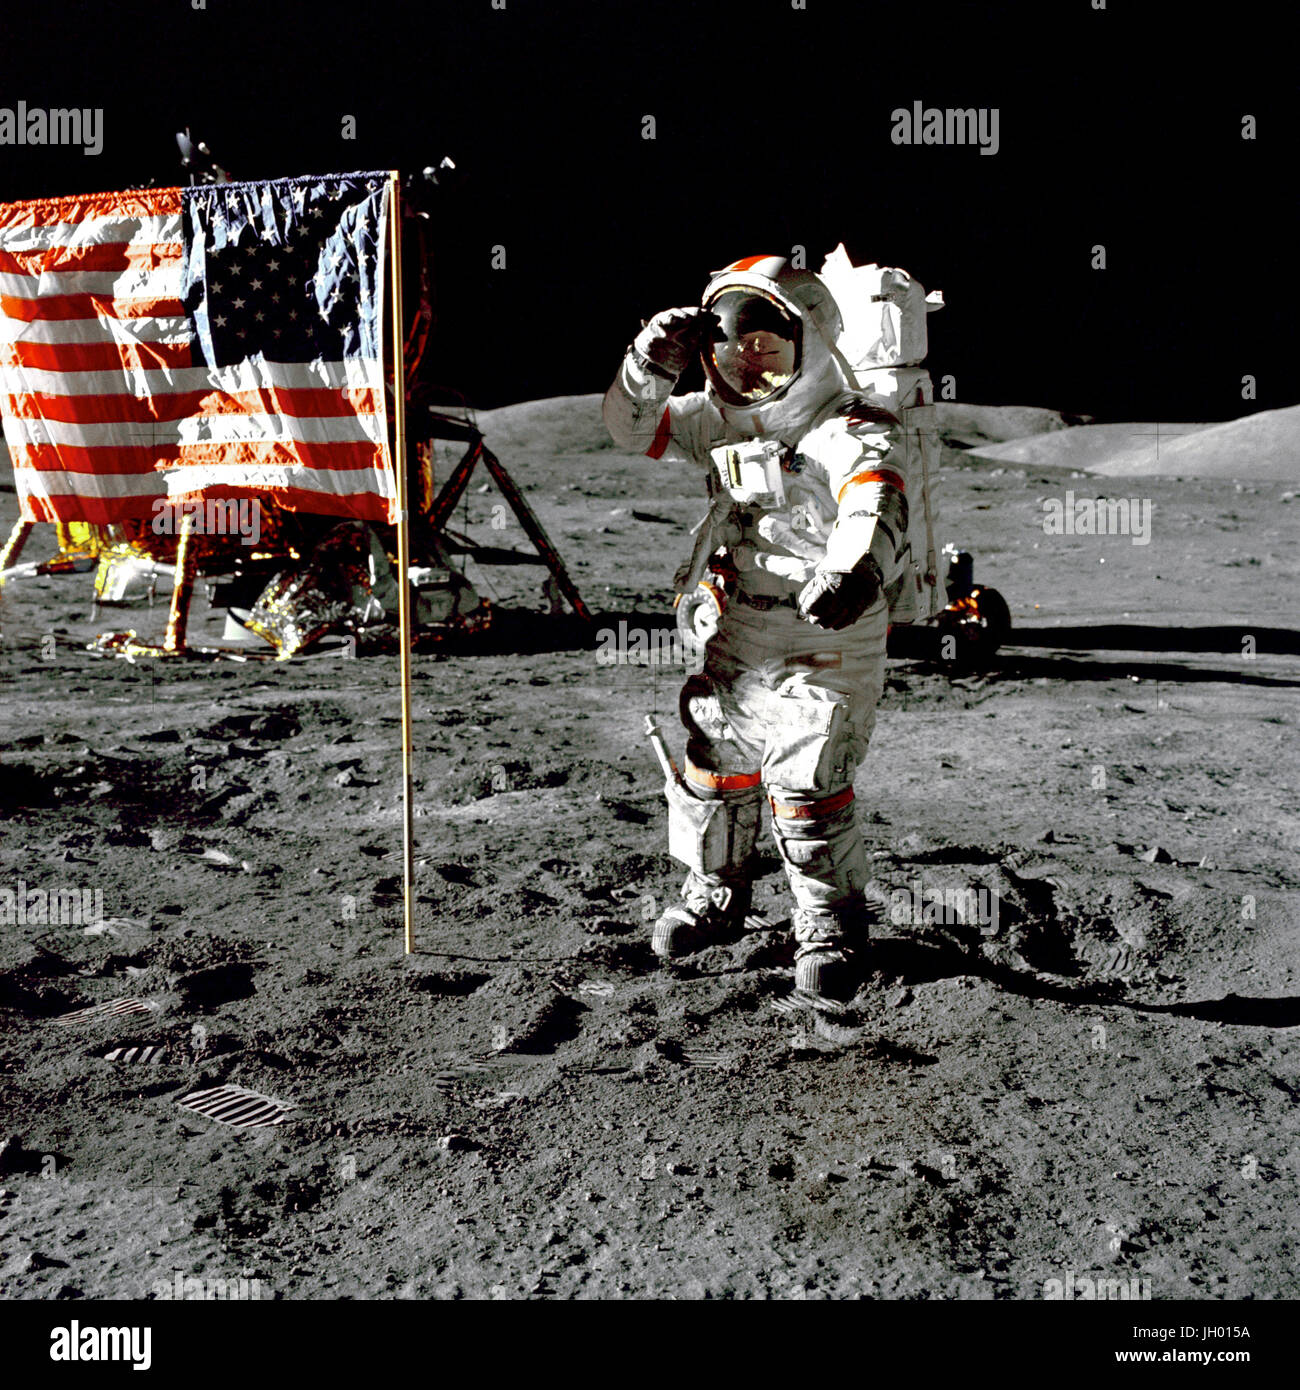 Cernan Jump Salutes Flag. Eugene A. Cernan, Commander, Apollo 17 salutes the flag on the lunar surface during extravehicular activity (EVA) on NASA's final lunar landing mission. The Lunar Module 'Challenger' is in the left background behind the flag and the Lunar Roving Vehicle (LRV) also in background behind him. While astronauts Cernan and Schmitt descended in the Challenger to explore the Taurus-Littrow region of the Moon, astronaut Ronald E. Evans, Command Module pilot, remained with the Command/Service Module (CSM) 'America' in lunar-orbit. Photographer: NASA Harrison Schmitt Stock Photo